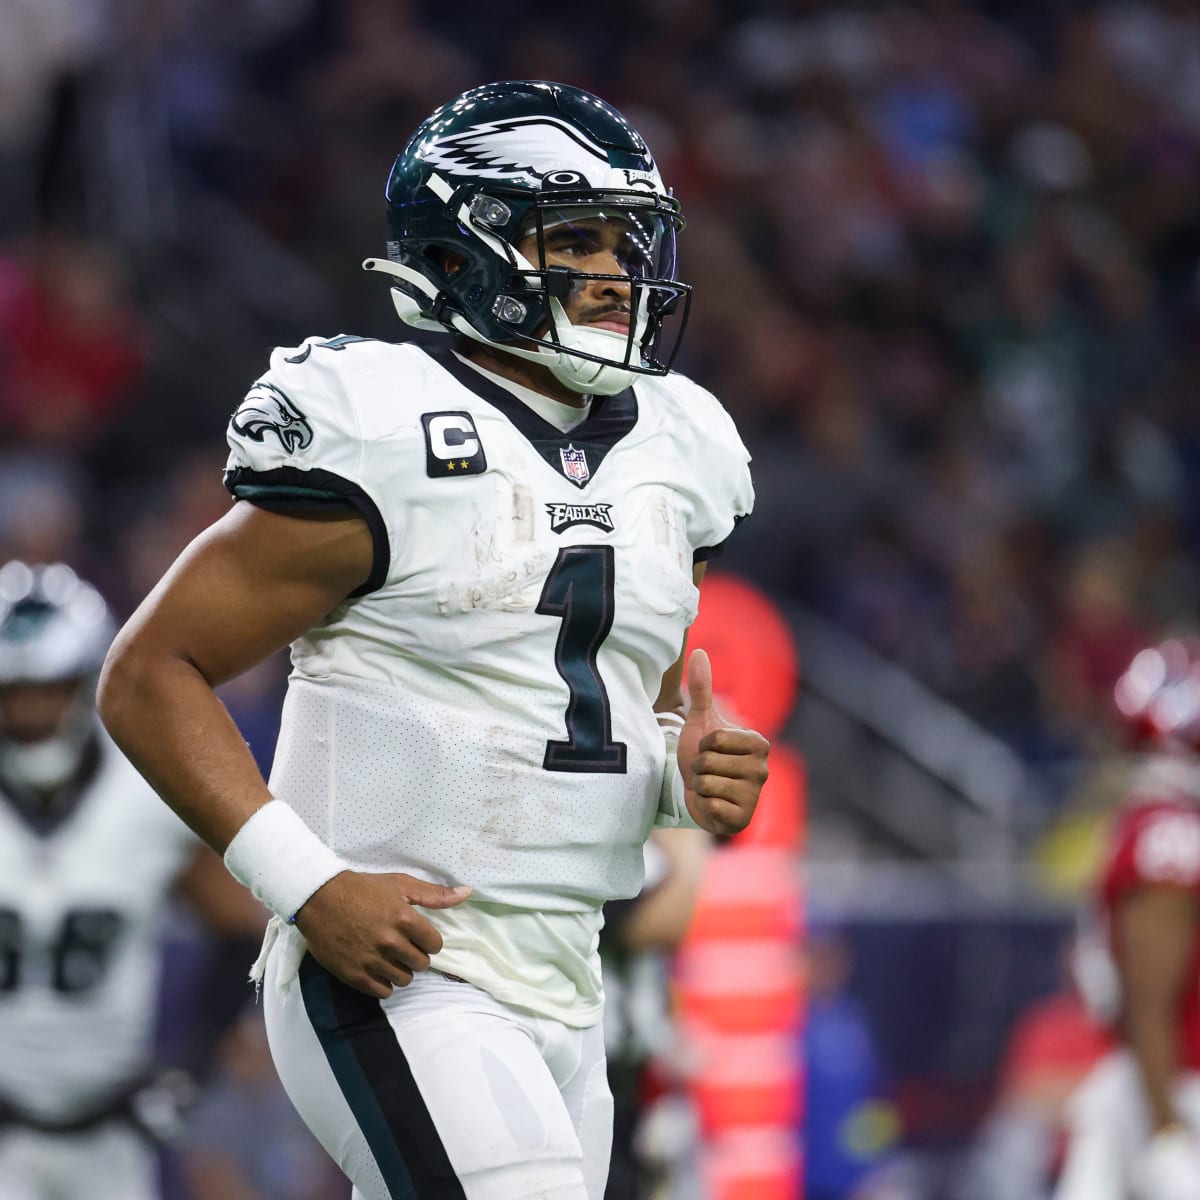 Eagles: Projecting the 53-man roster post-OTAs - A to Z Sports